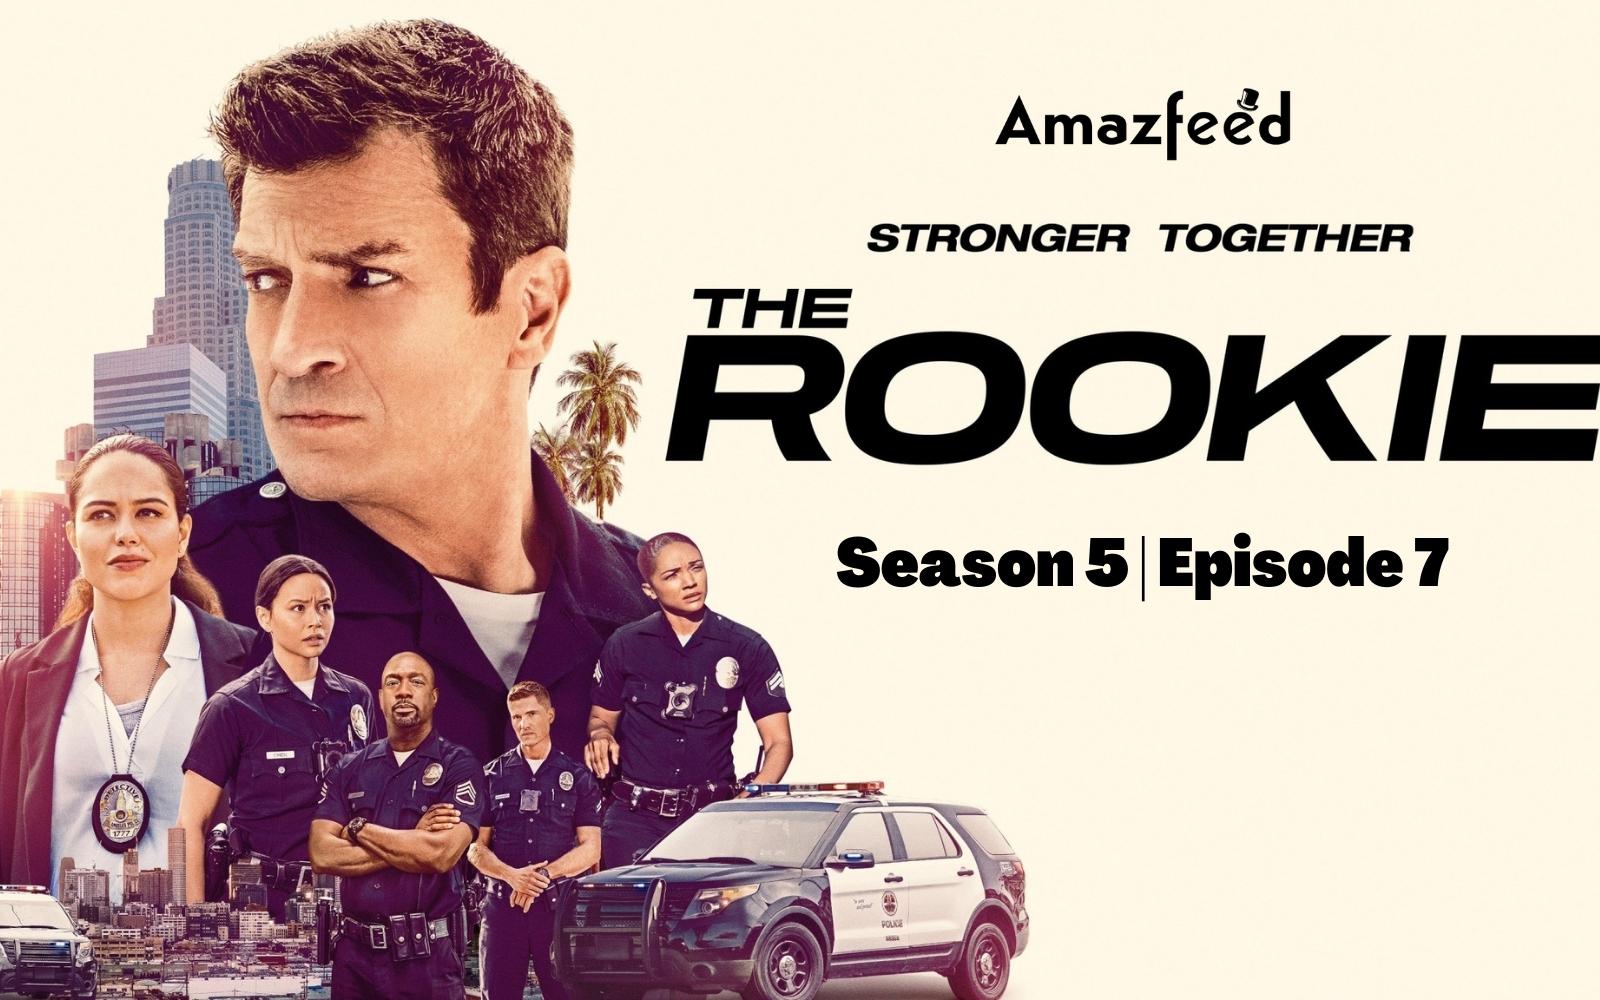 The Rookie Season 5 Episode 7 'Crossfire' ⇒ Spoilers, Countdown, Speculation, Recap, Cast & News Updates